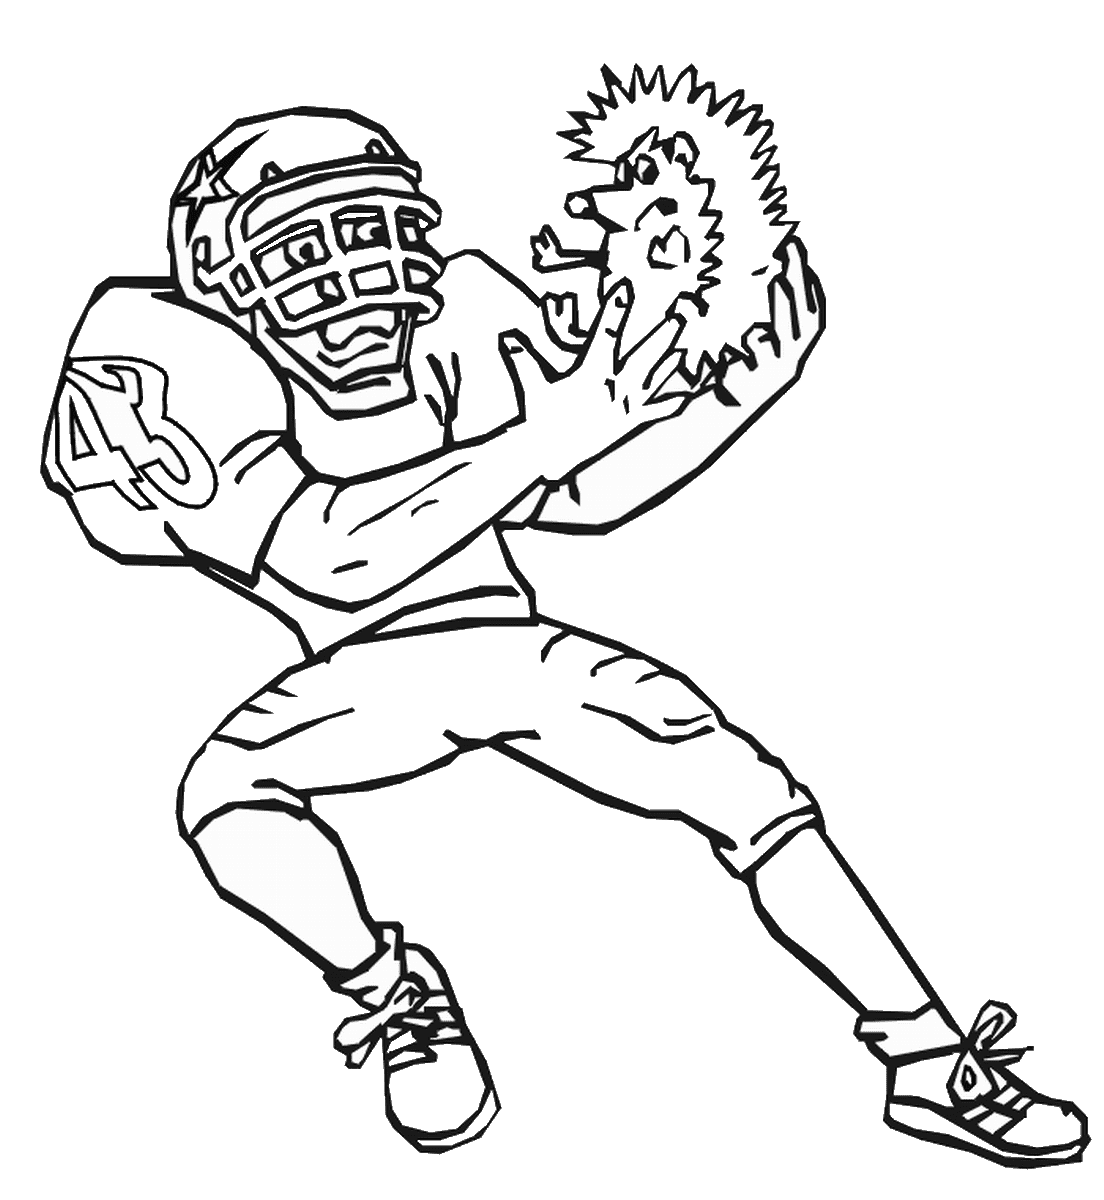 printable-football-player-coloring-pages-football-coloring-pages